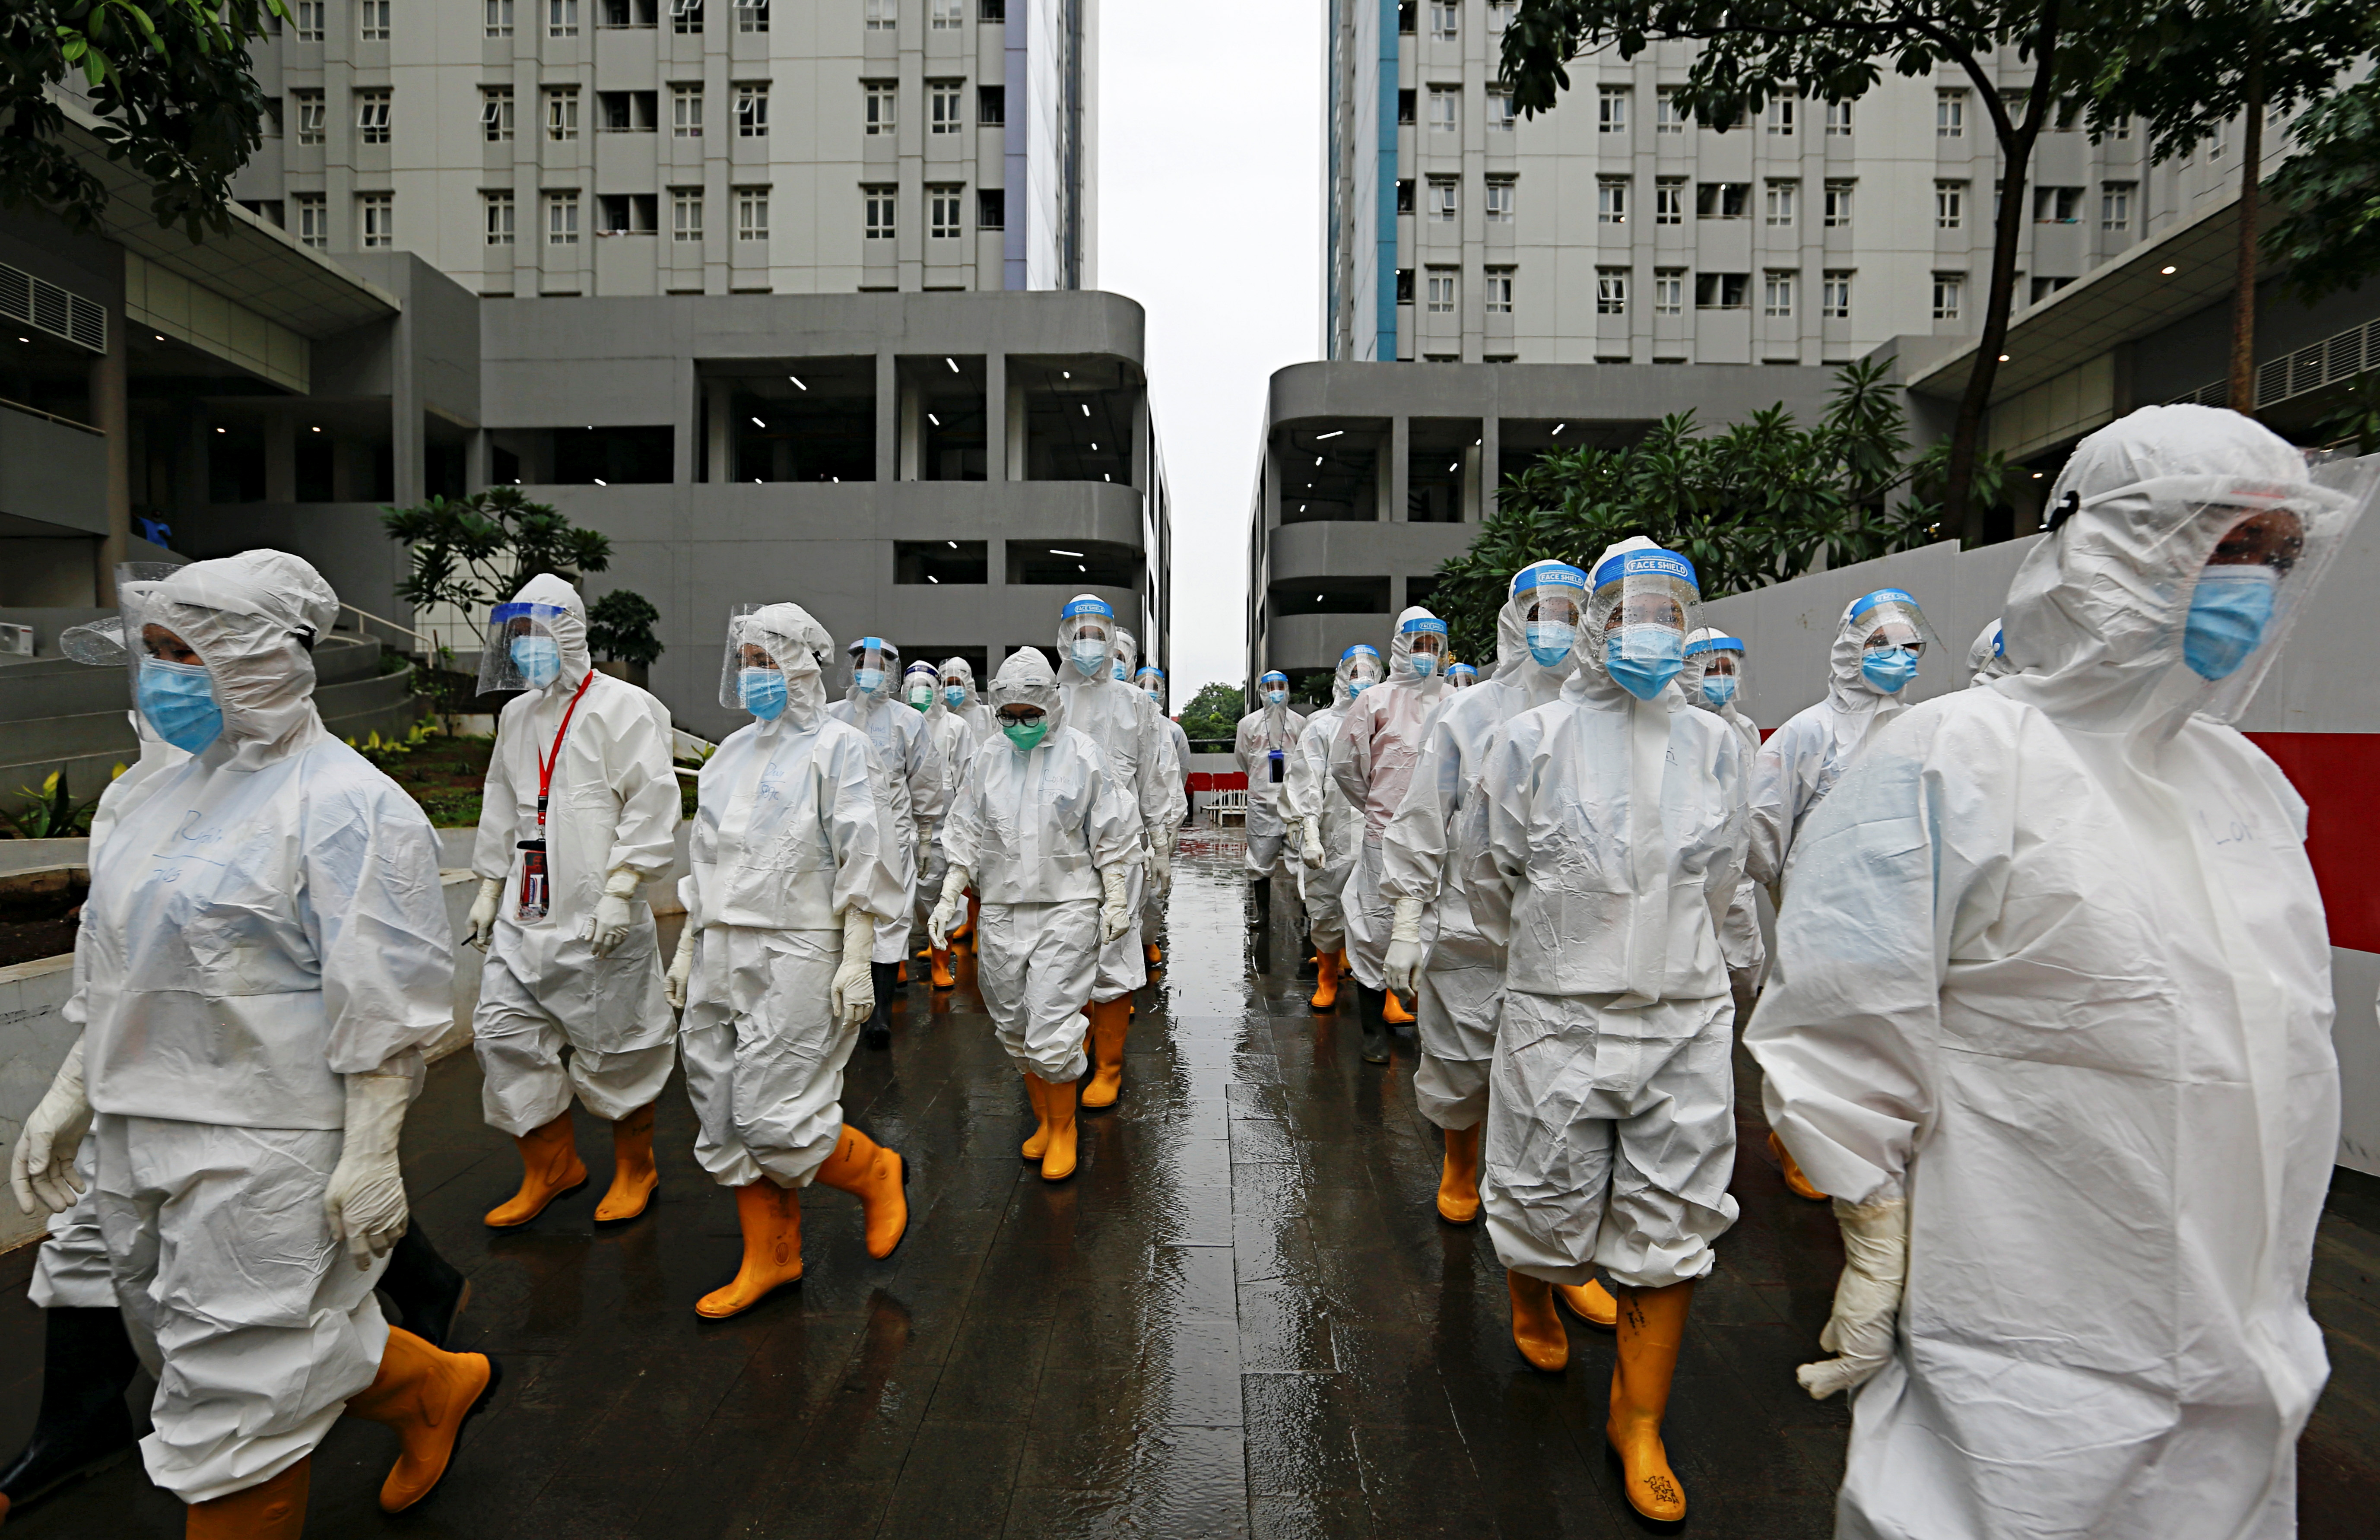 Healthcare workers prepare to treat patients at the emergency hospital for coronavirus disease (COVID-19) in Athletes Village, Jakarta, Indonesia January 26, 2021. REUTERS/Ajeng Dinar Ulfiana